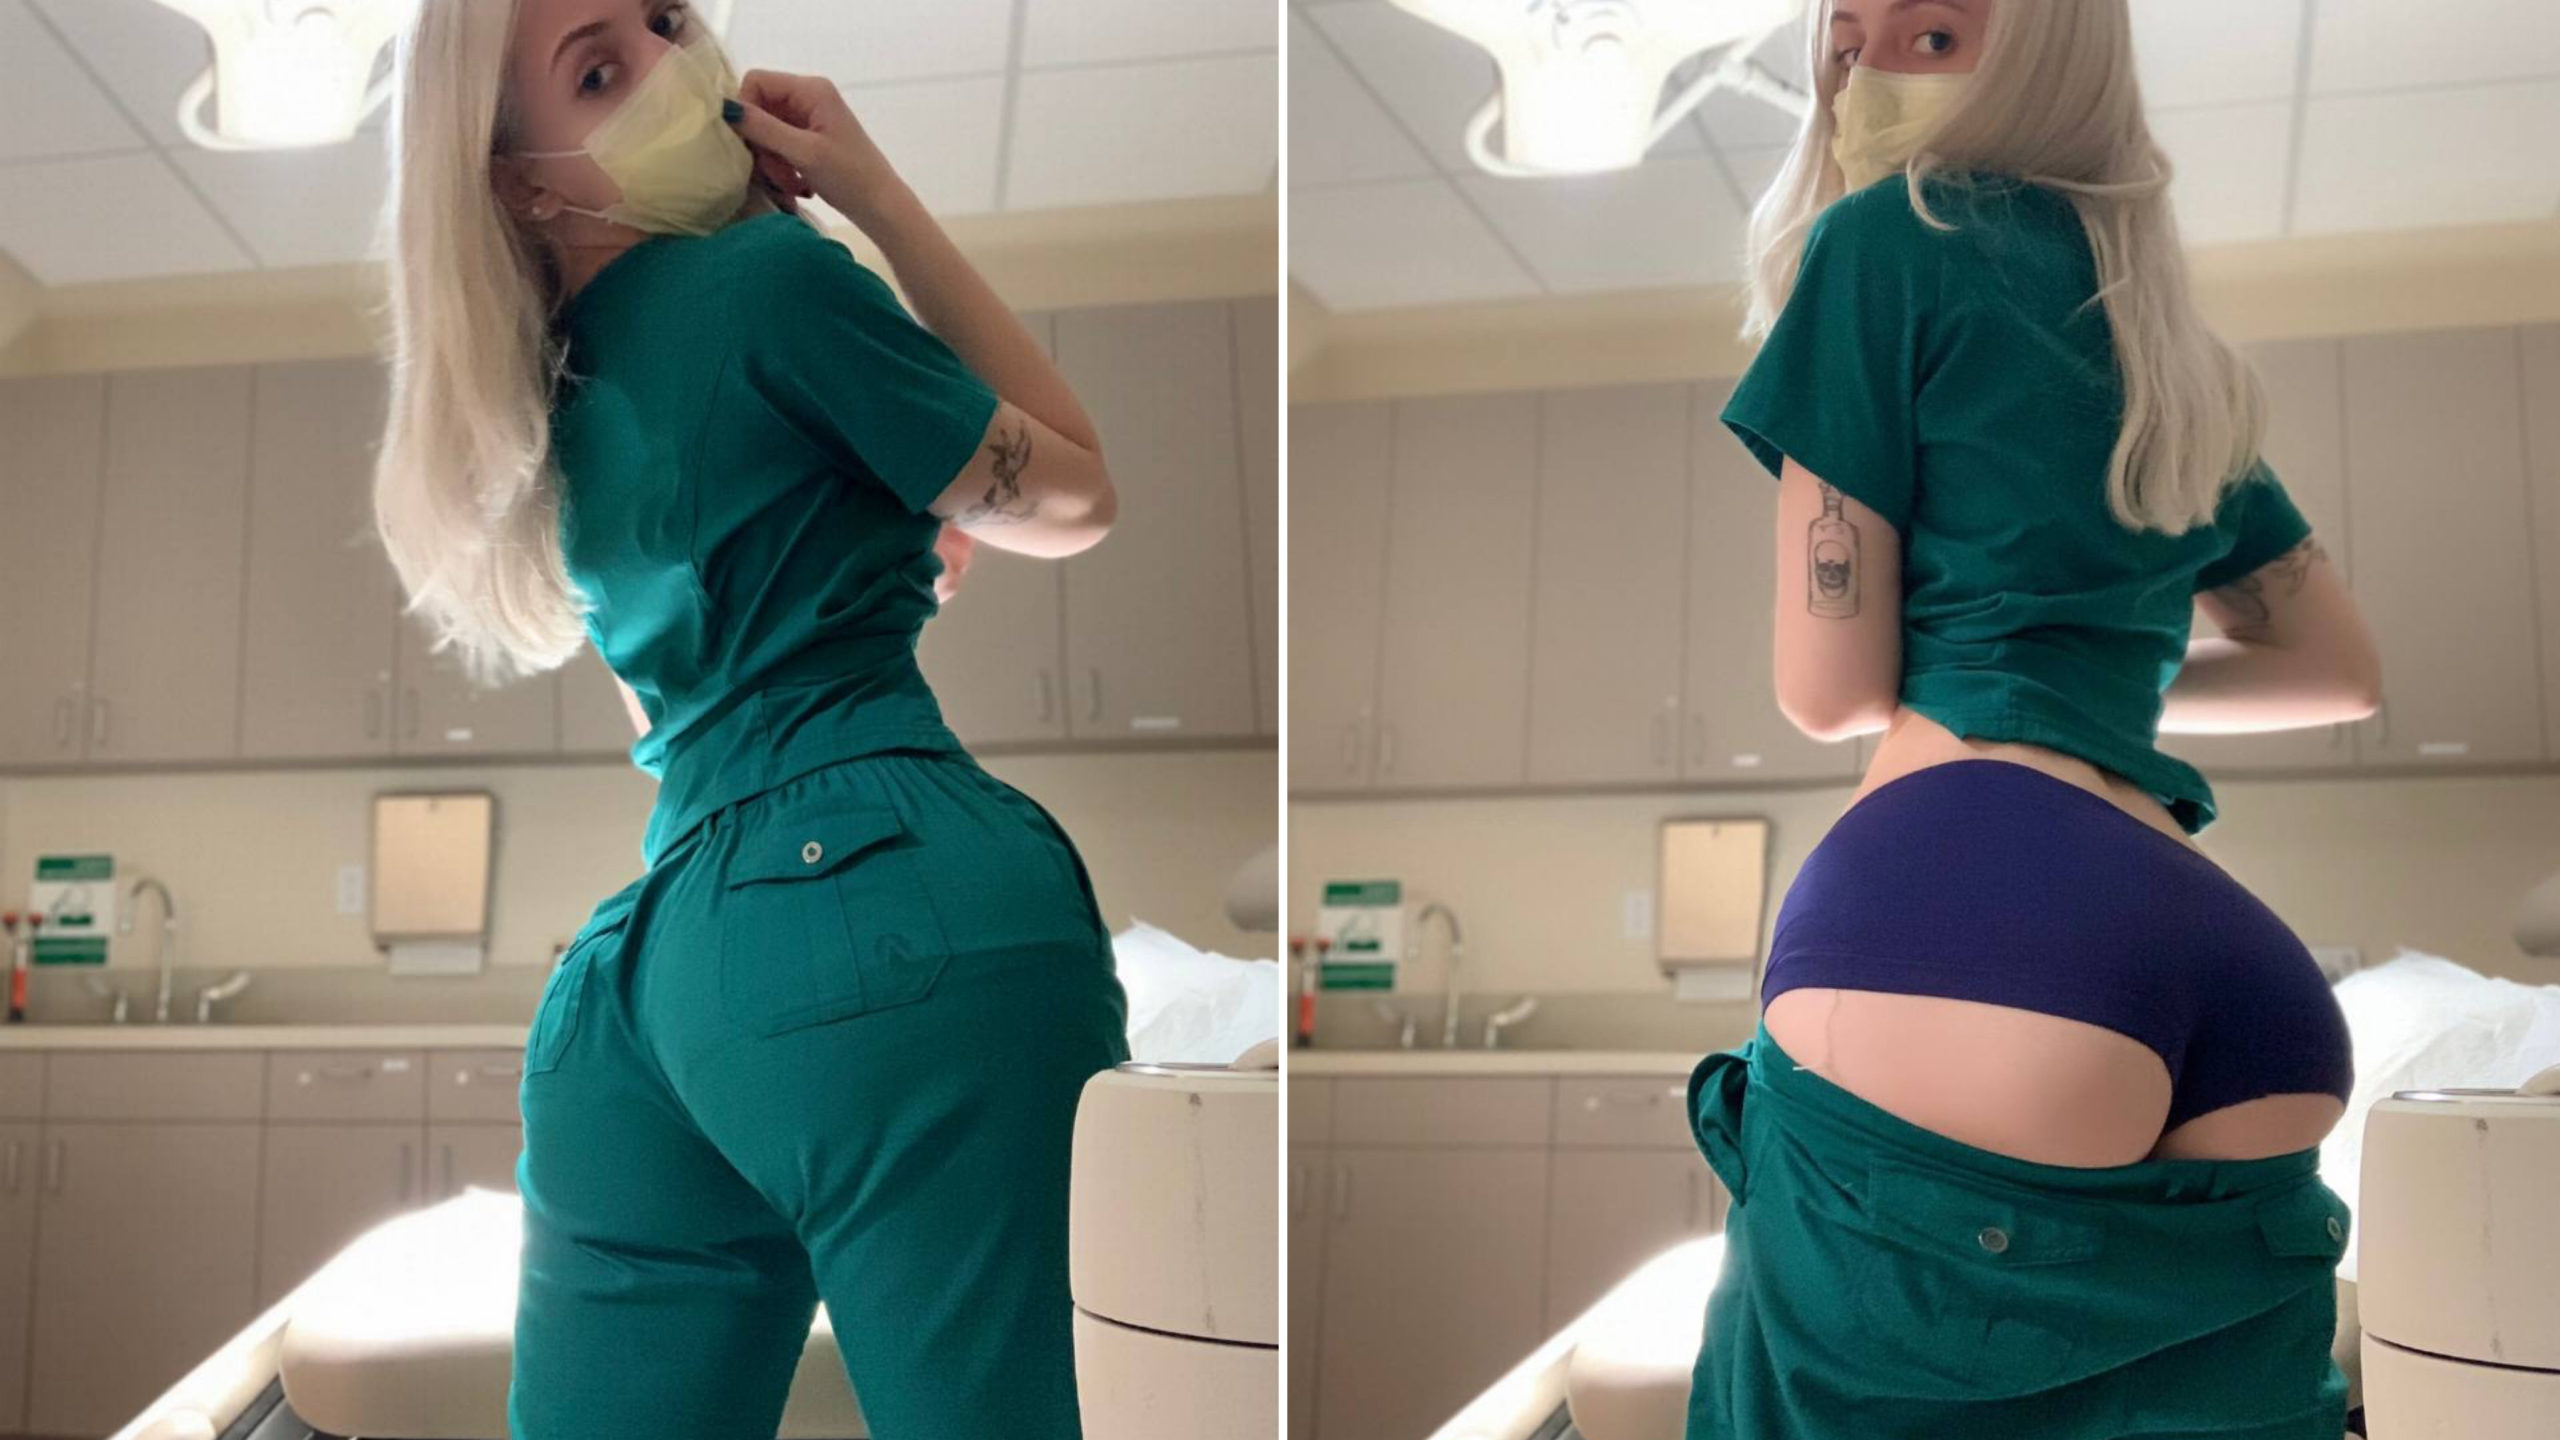 Nurse FIRED After Onlyfans Clip with Covid-19 Patient Goes Viral